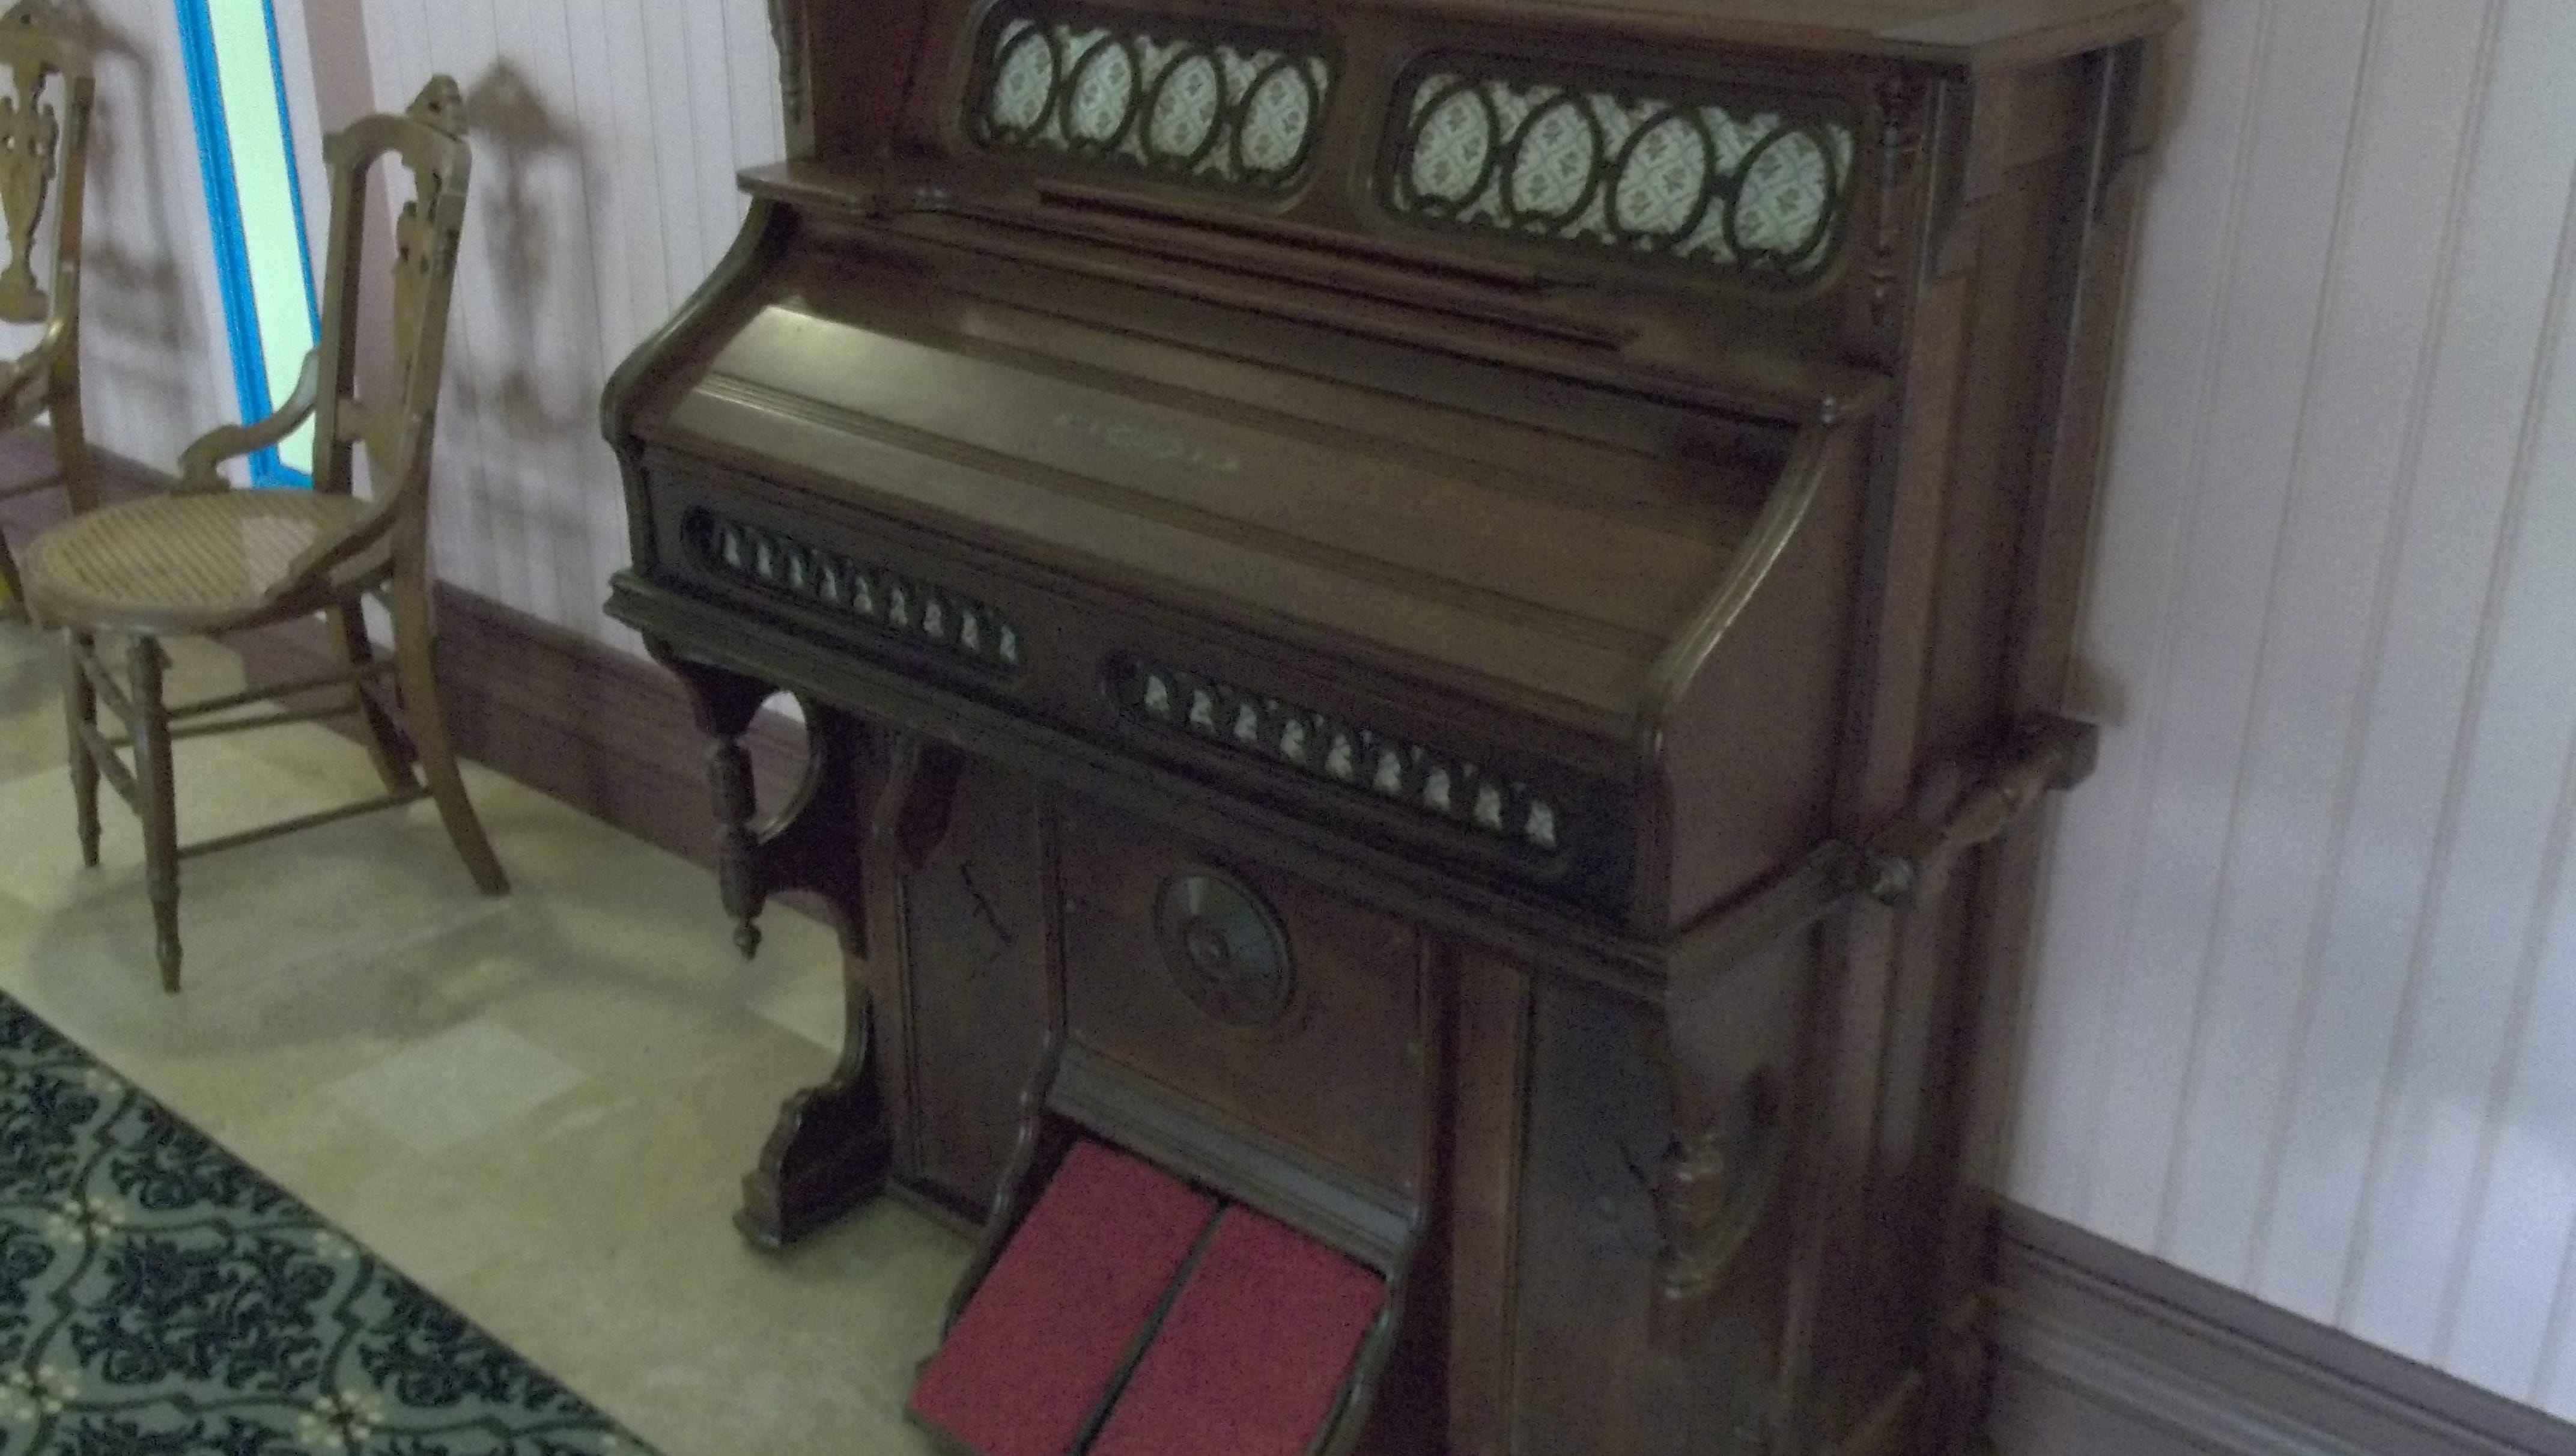 Yet another organ in the home.